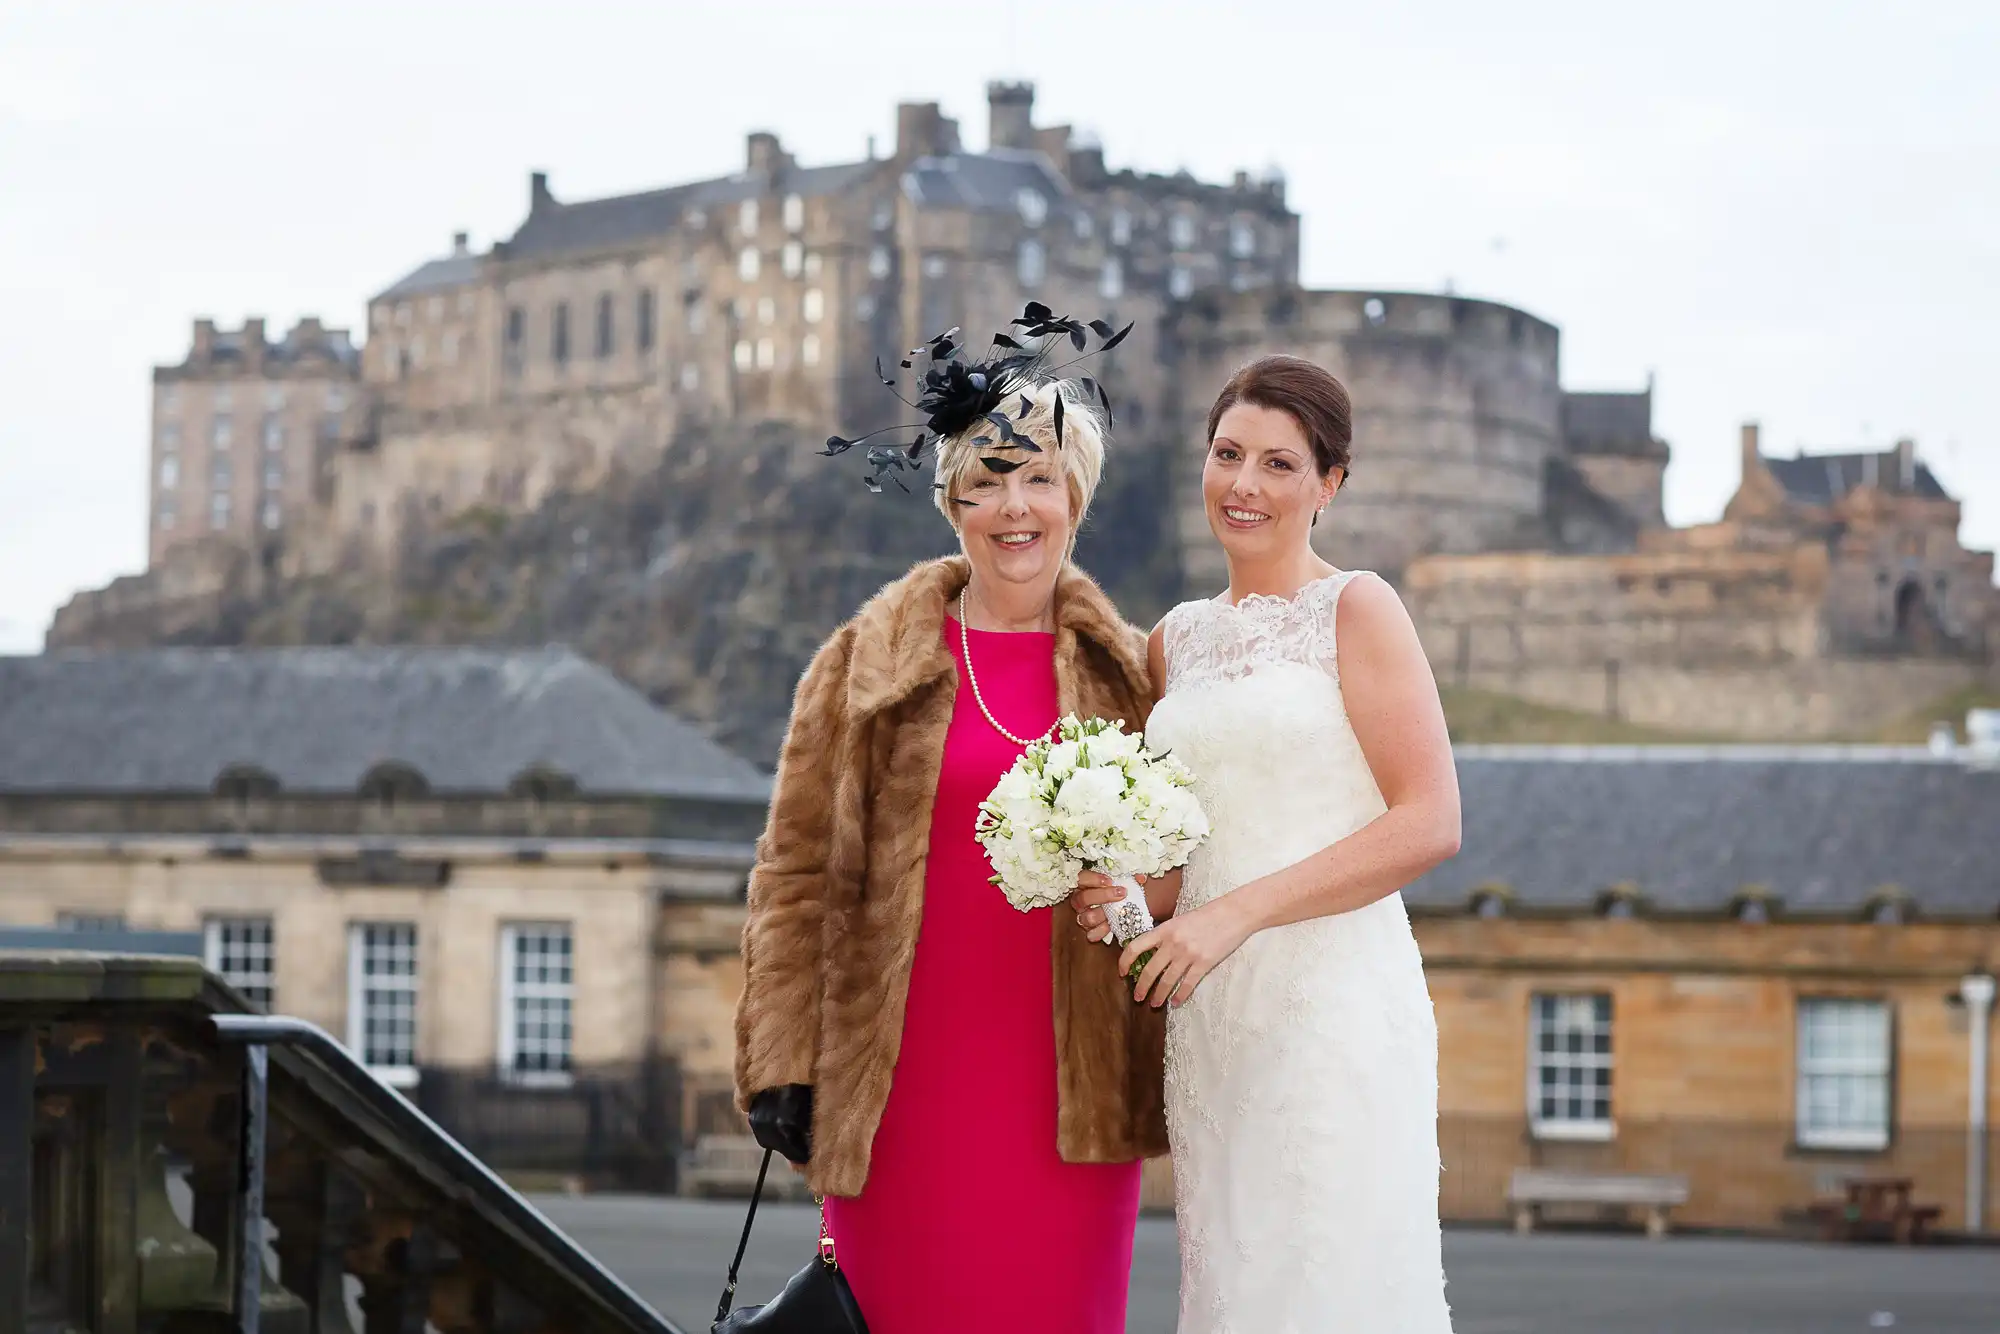 Two women, one in a wedding dress and the other in a red dress and black hat, standing in front of edinburgh castle.